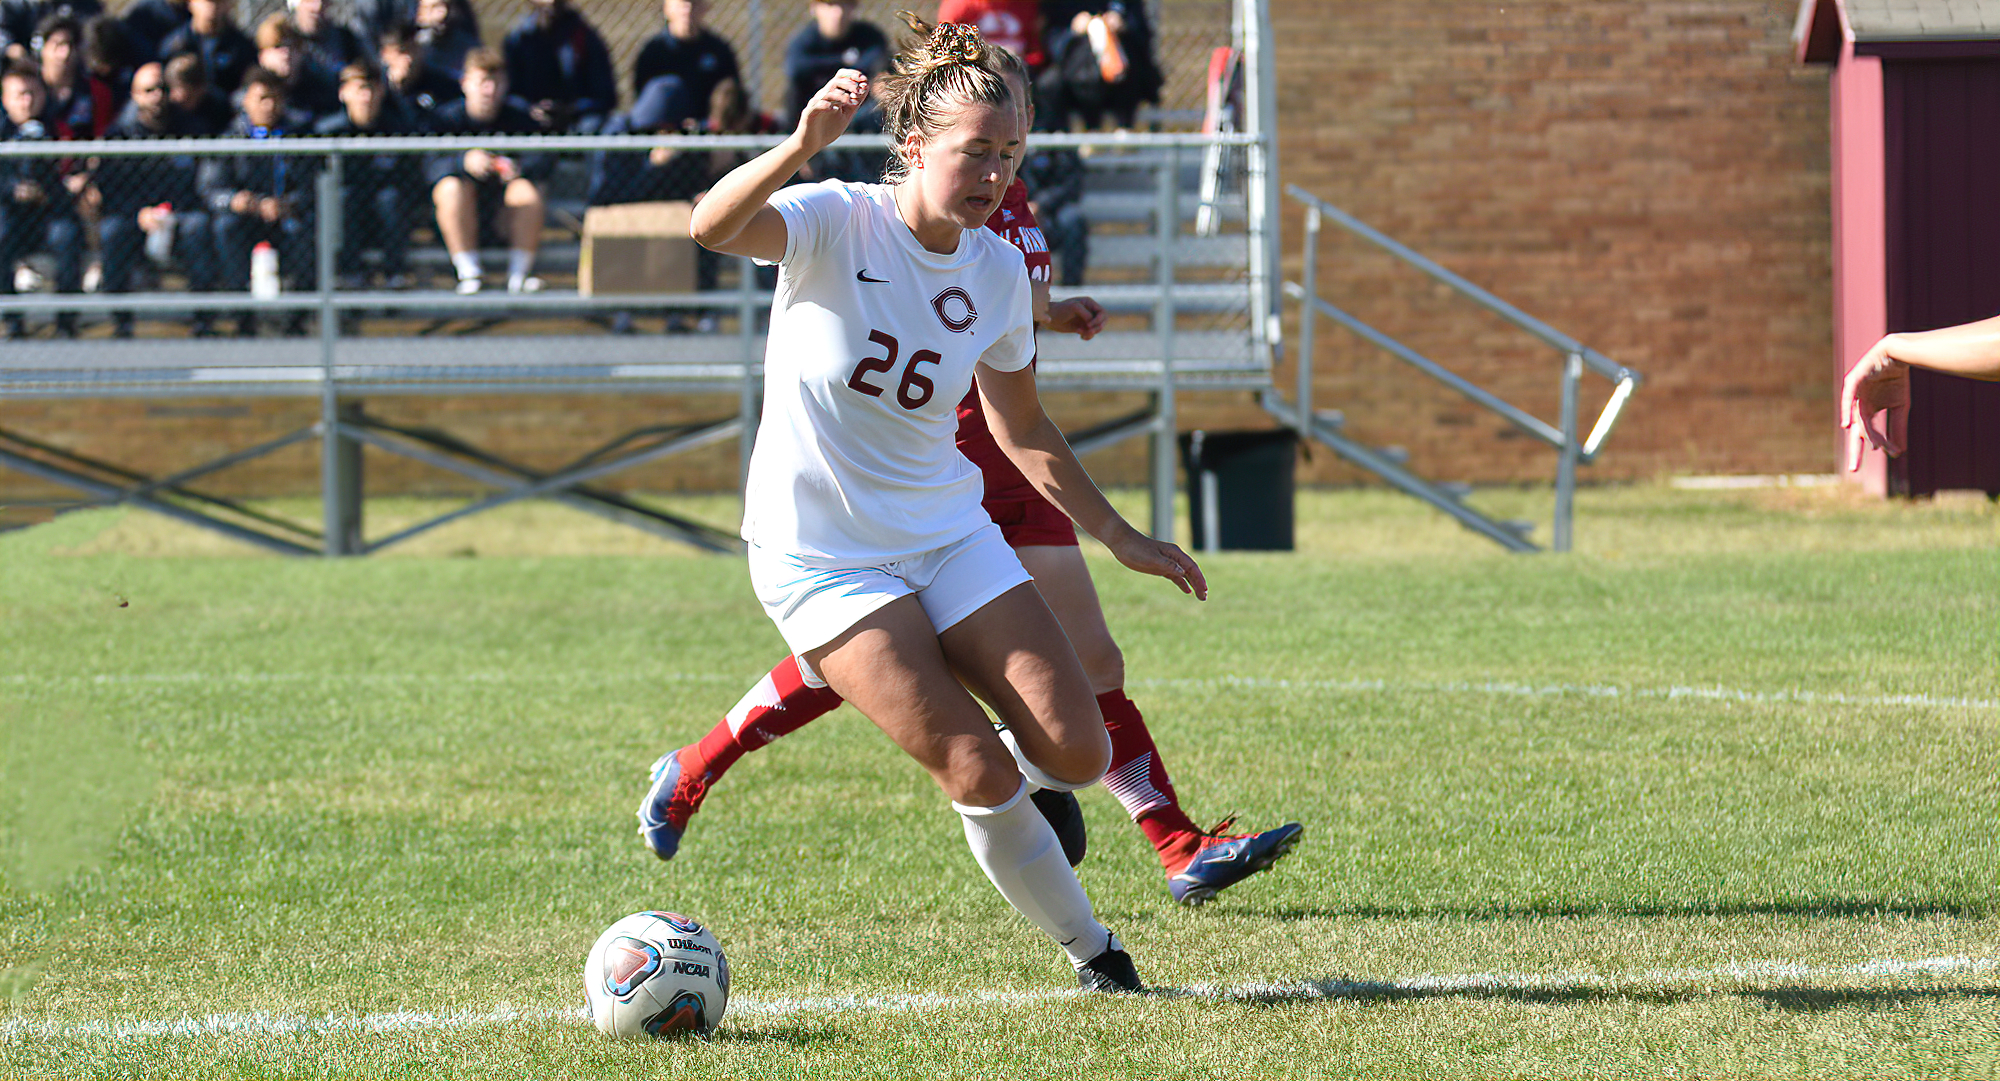 Senior Sophia Robinson led Concordia with a pair of shots in the Cobbers' game at St. Olaf.